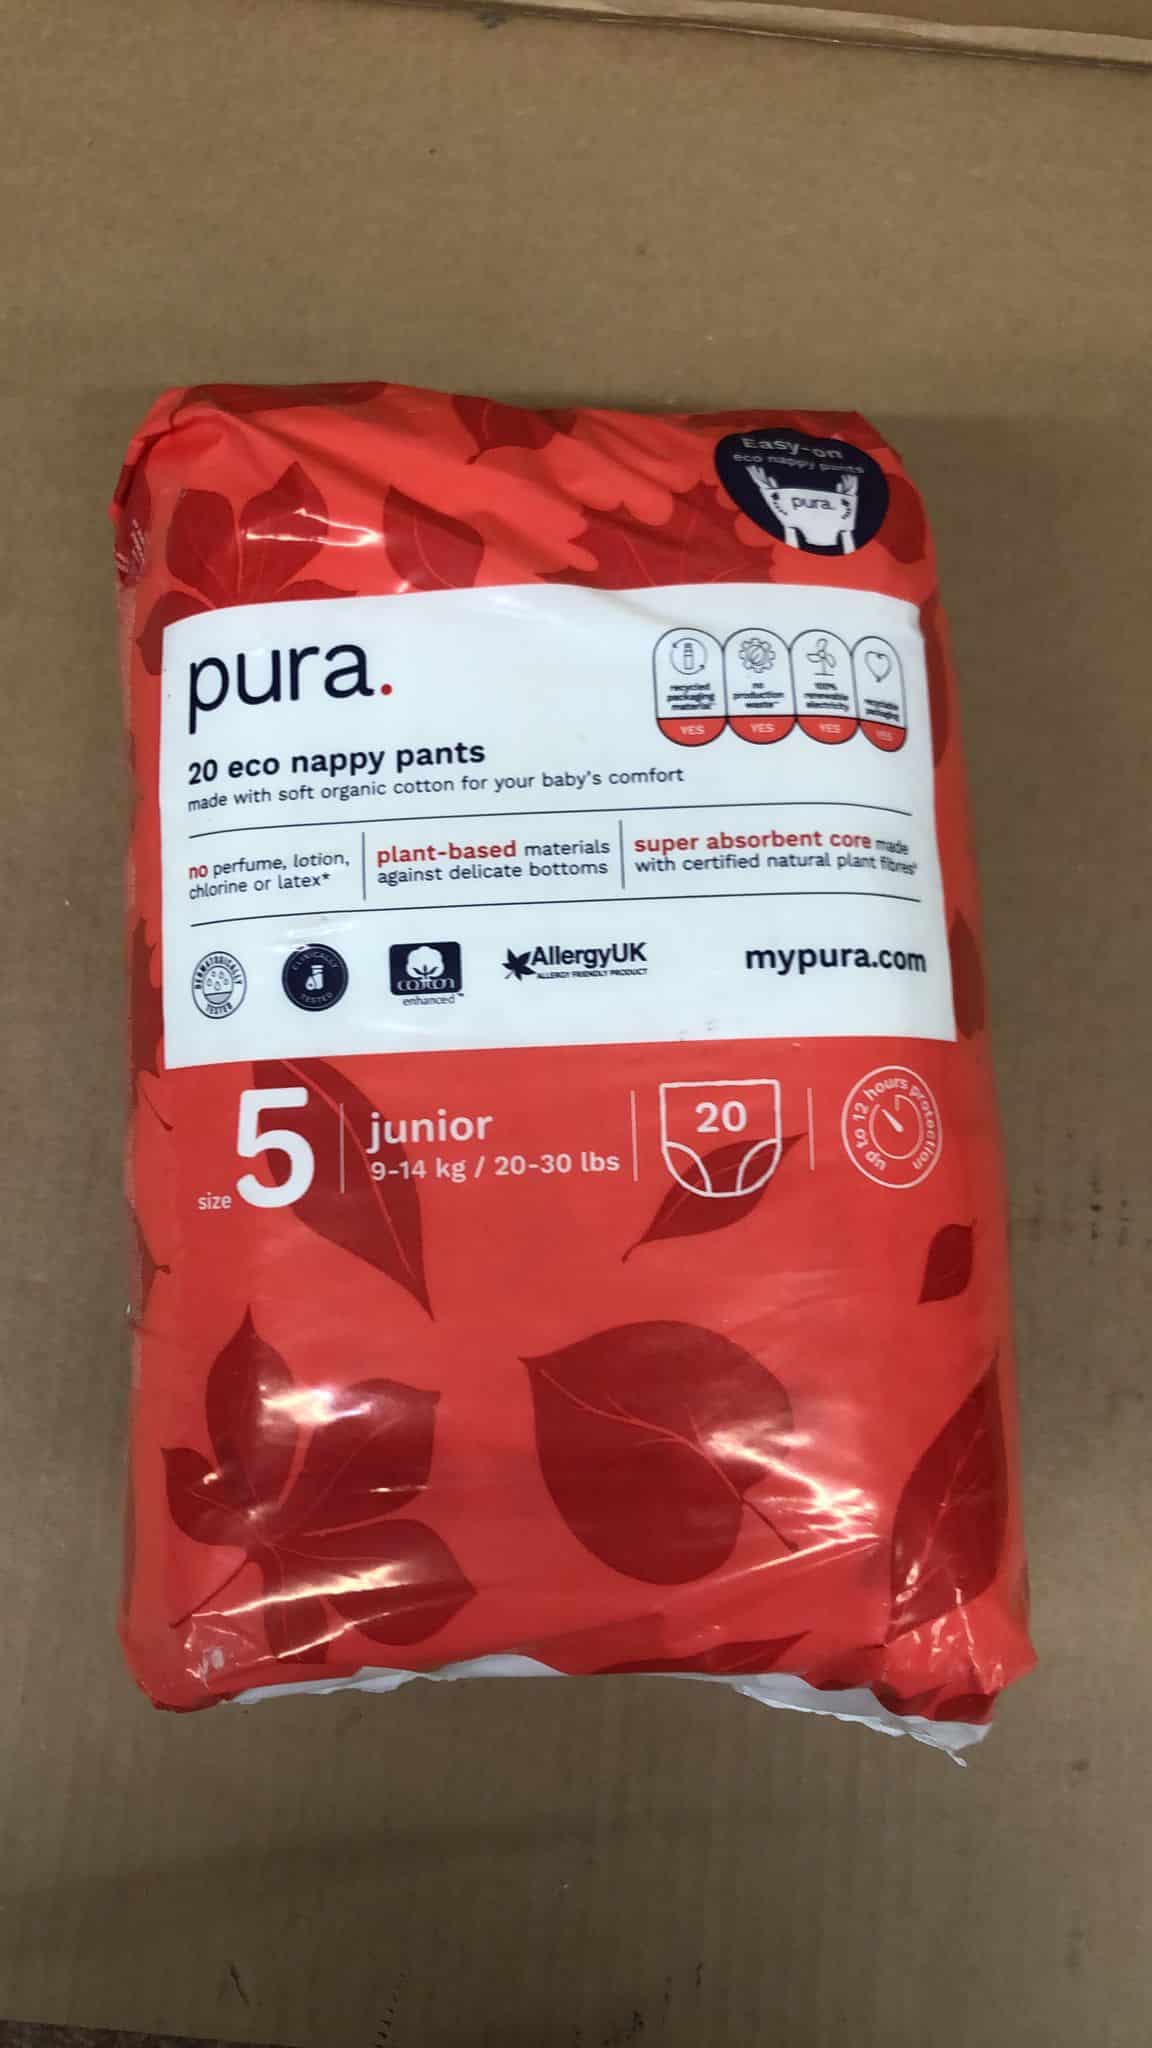 Pura Premium Eco Nappy Pants Size 5 (9-14kg /20-30lbs) -pack of 20-20459